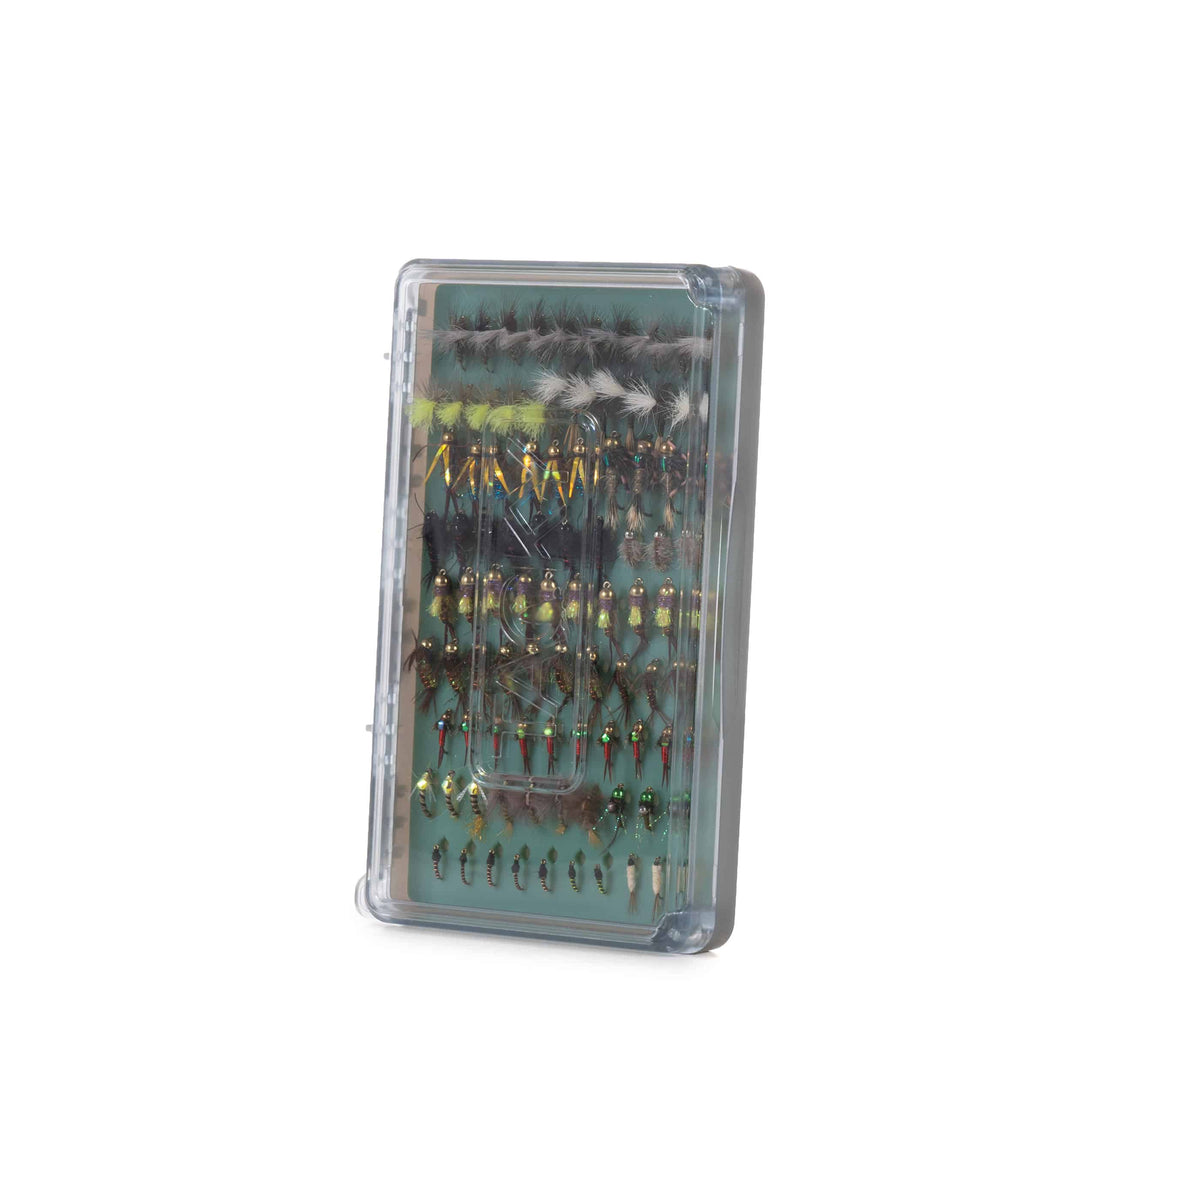 Tacky Day Pack Fly Box Single Sided Fly Box With Silicone Storage Slits Closed High Visibility Lid